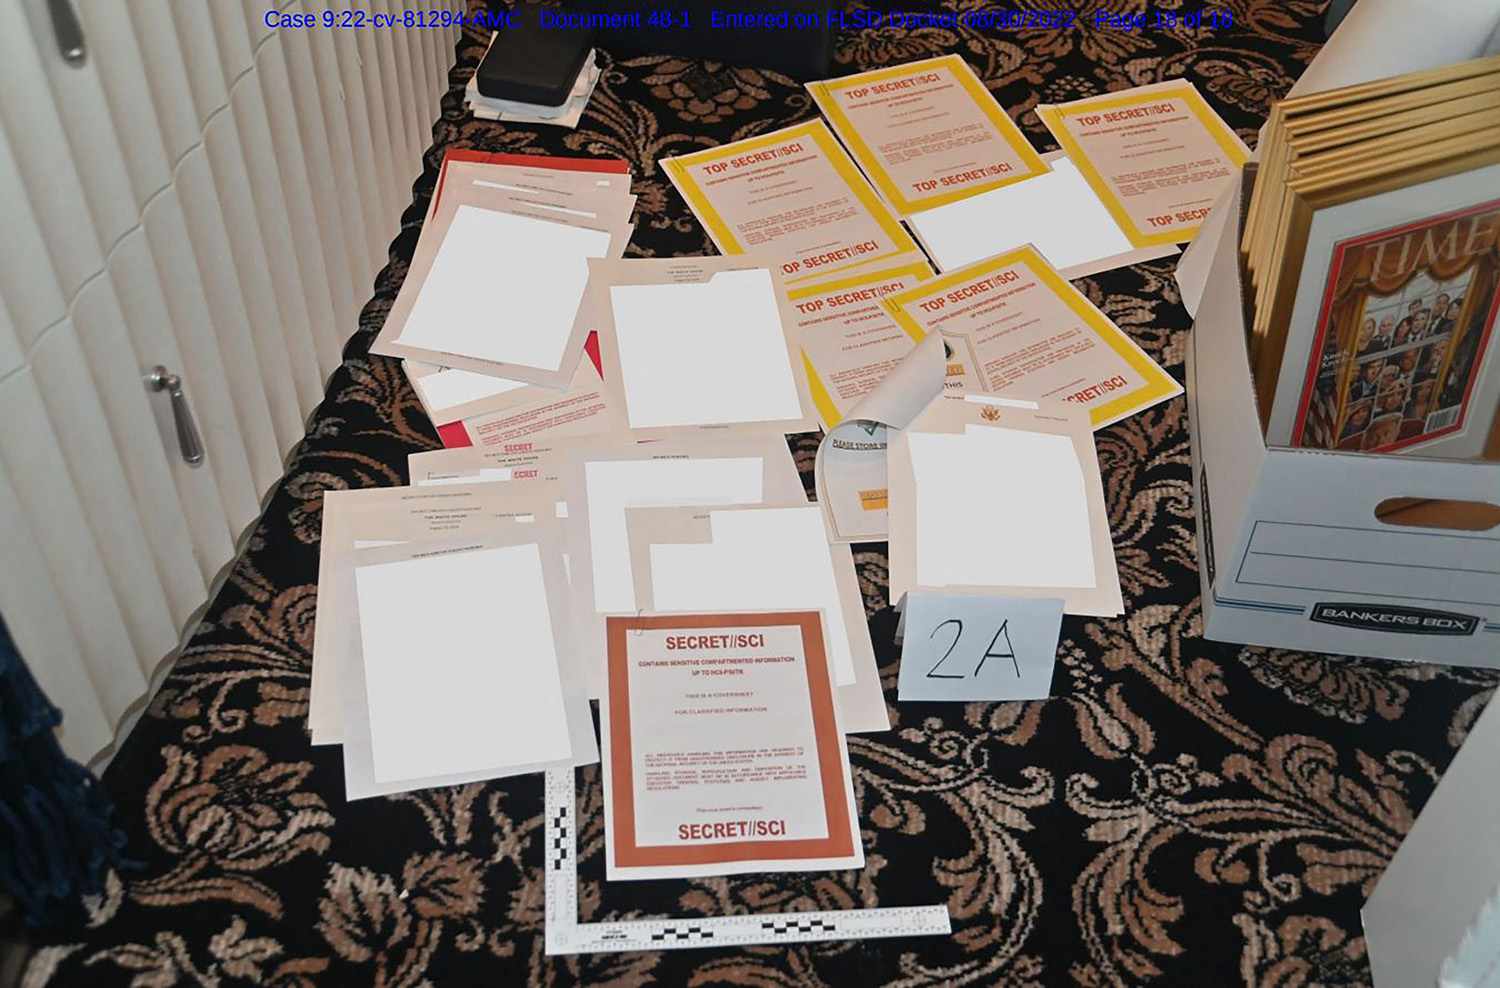 This undated image released by the US Department of Justice, shows a photo attached as evidence to a court filing by the US District Court Southern District of Florida, of documents allegedly seized at Mar-a-Lago spread over a carpet. - Documents at former US President Donald Trump's Florida home were "likely concealed" to obstruct an FBI probe into his potential mishandling of classified materials, the Department of Justice said in a court filing August 30, 2022. The filing provides the most detailed account yet of the motivation for the FBI raid this month on Trump's Mar-a-Lago estate, which was triggered by a review of records he previously surrendered to authorities that contained top secret information